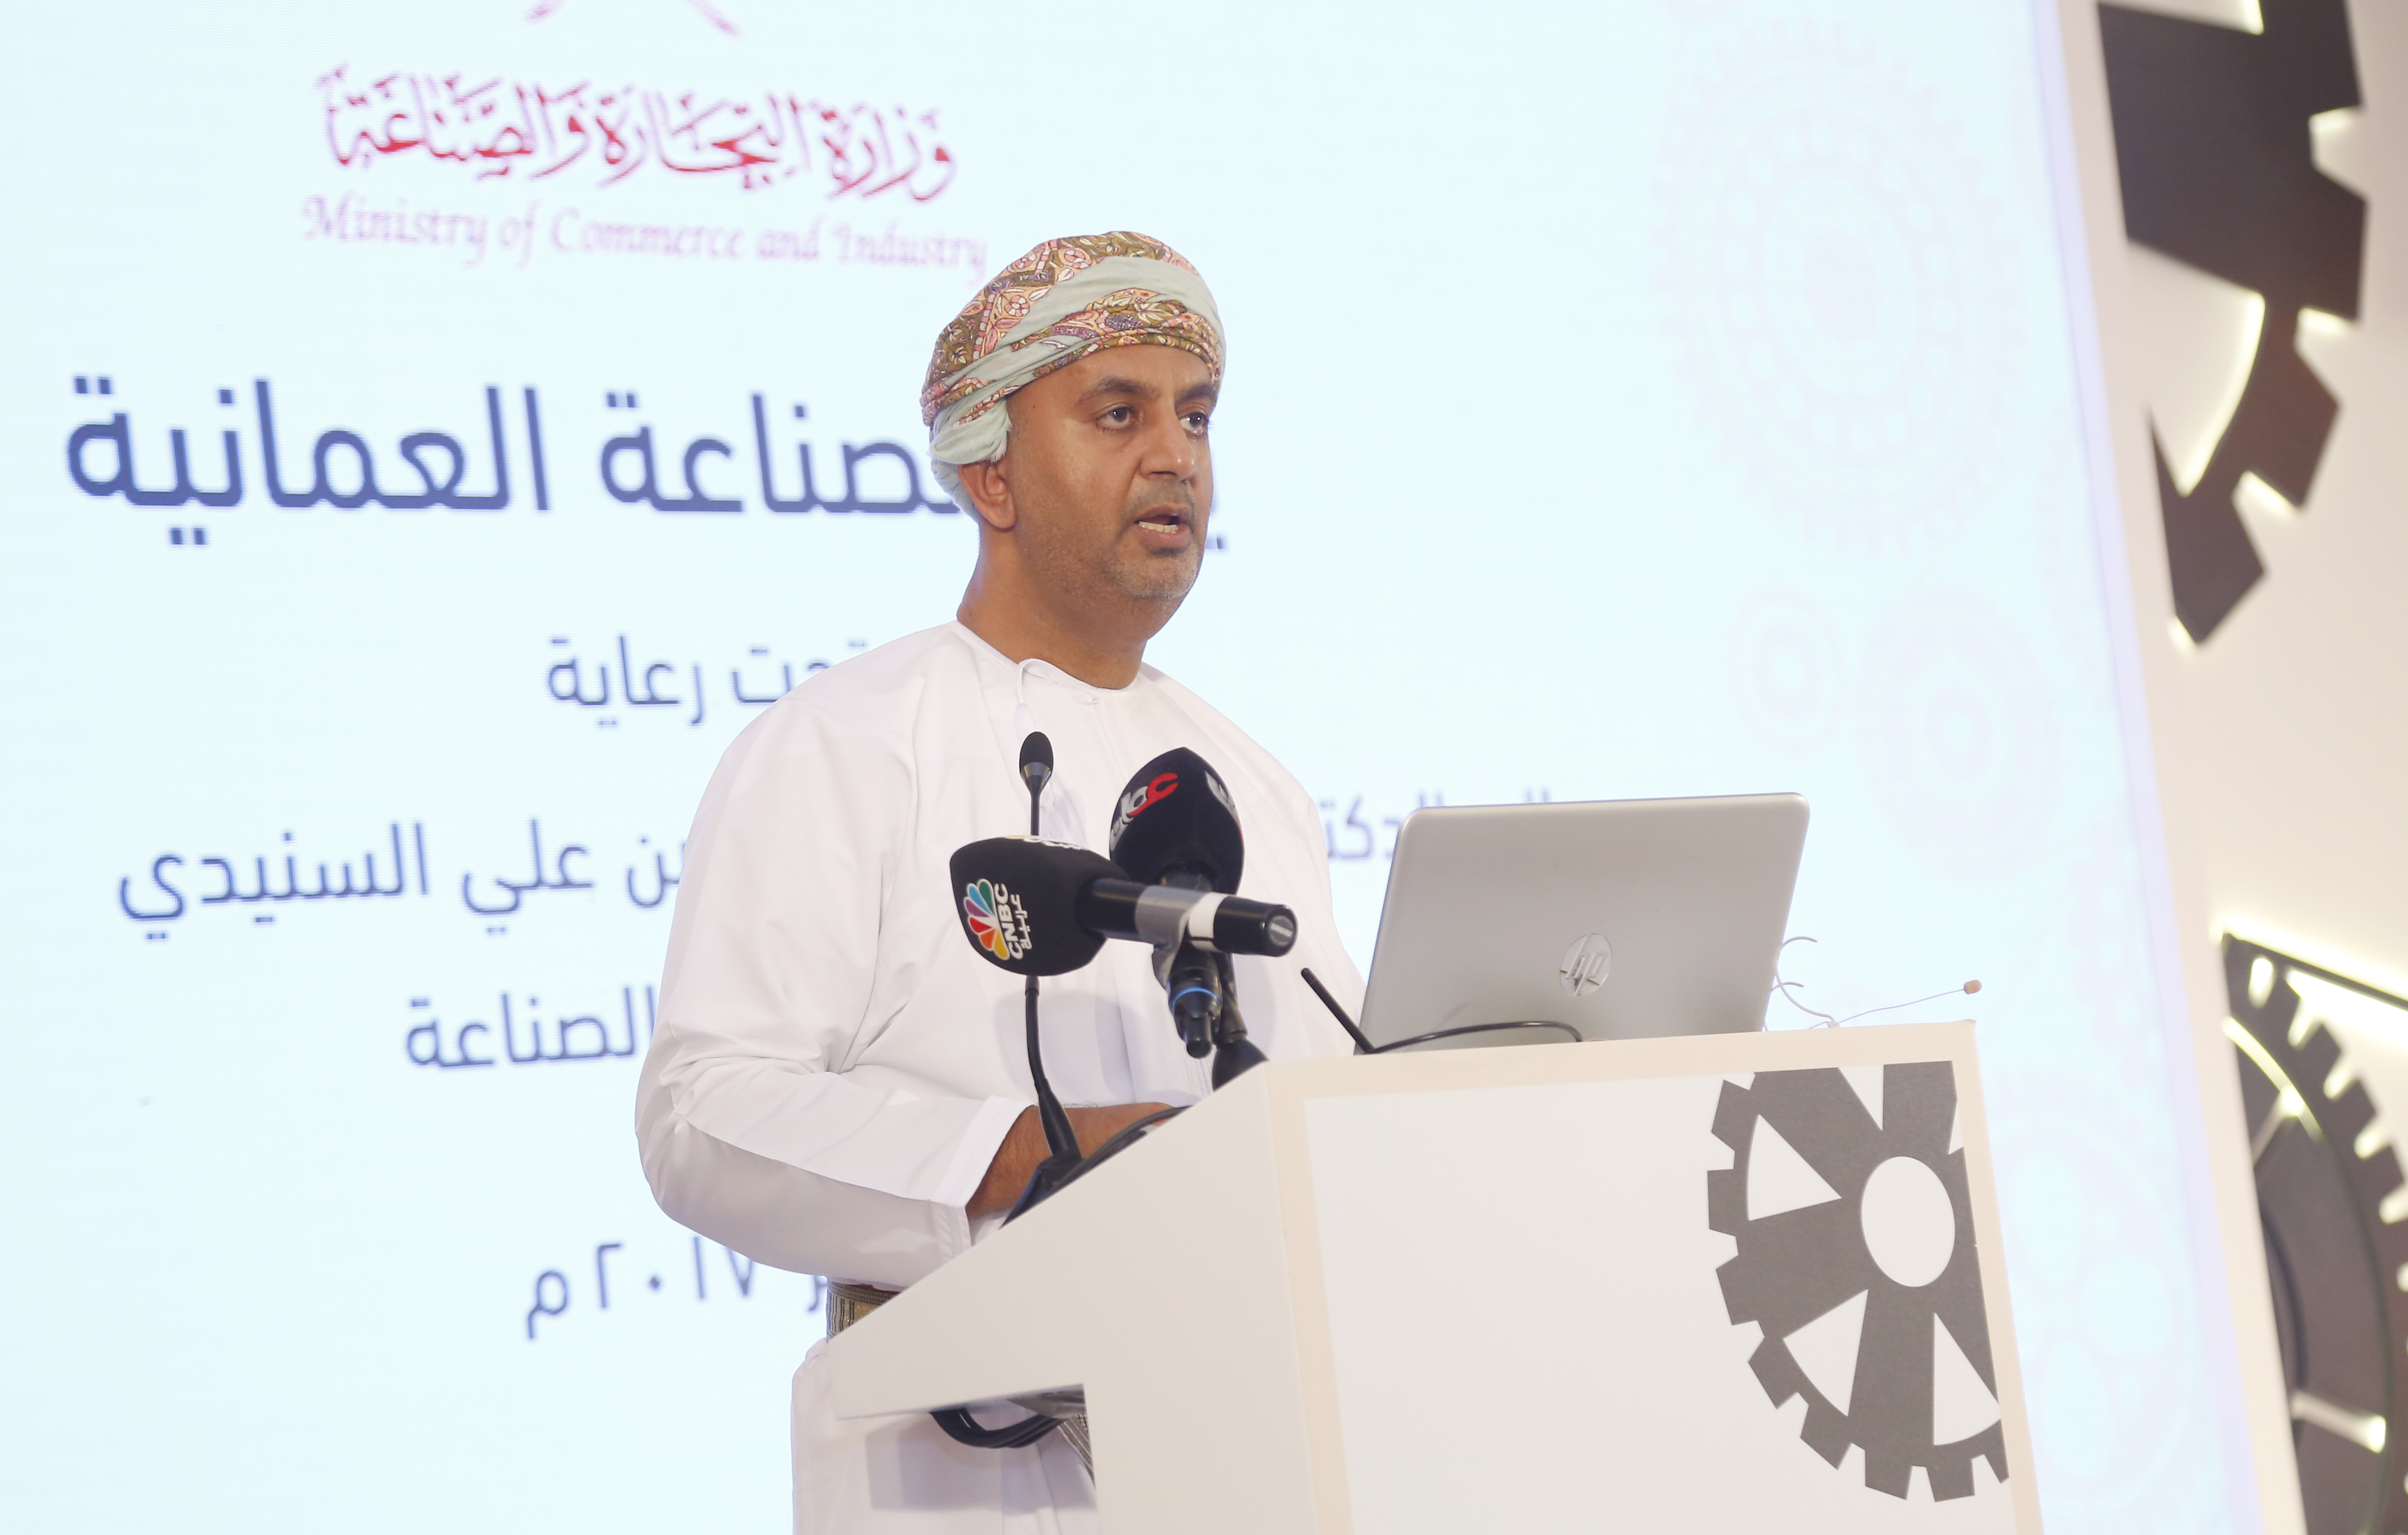 Oman government receives 300 applications for new industrial ventures: Minister